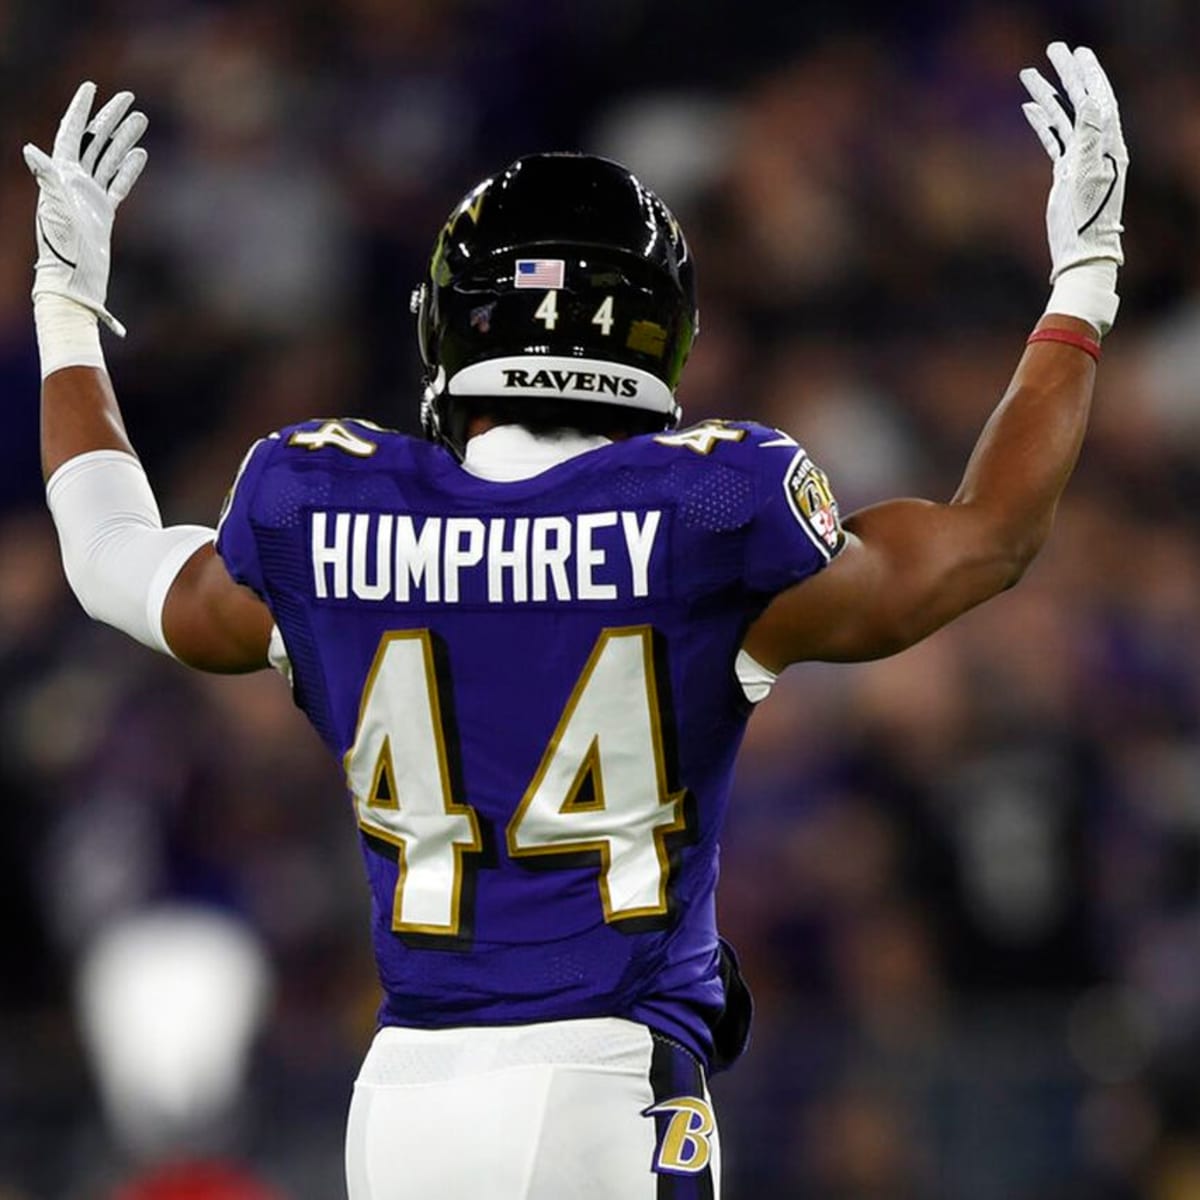 Ravens Marlon Humphrey Not Happy With Madden NFL 23 Video Game